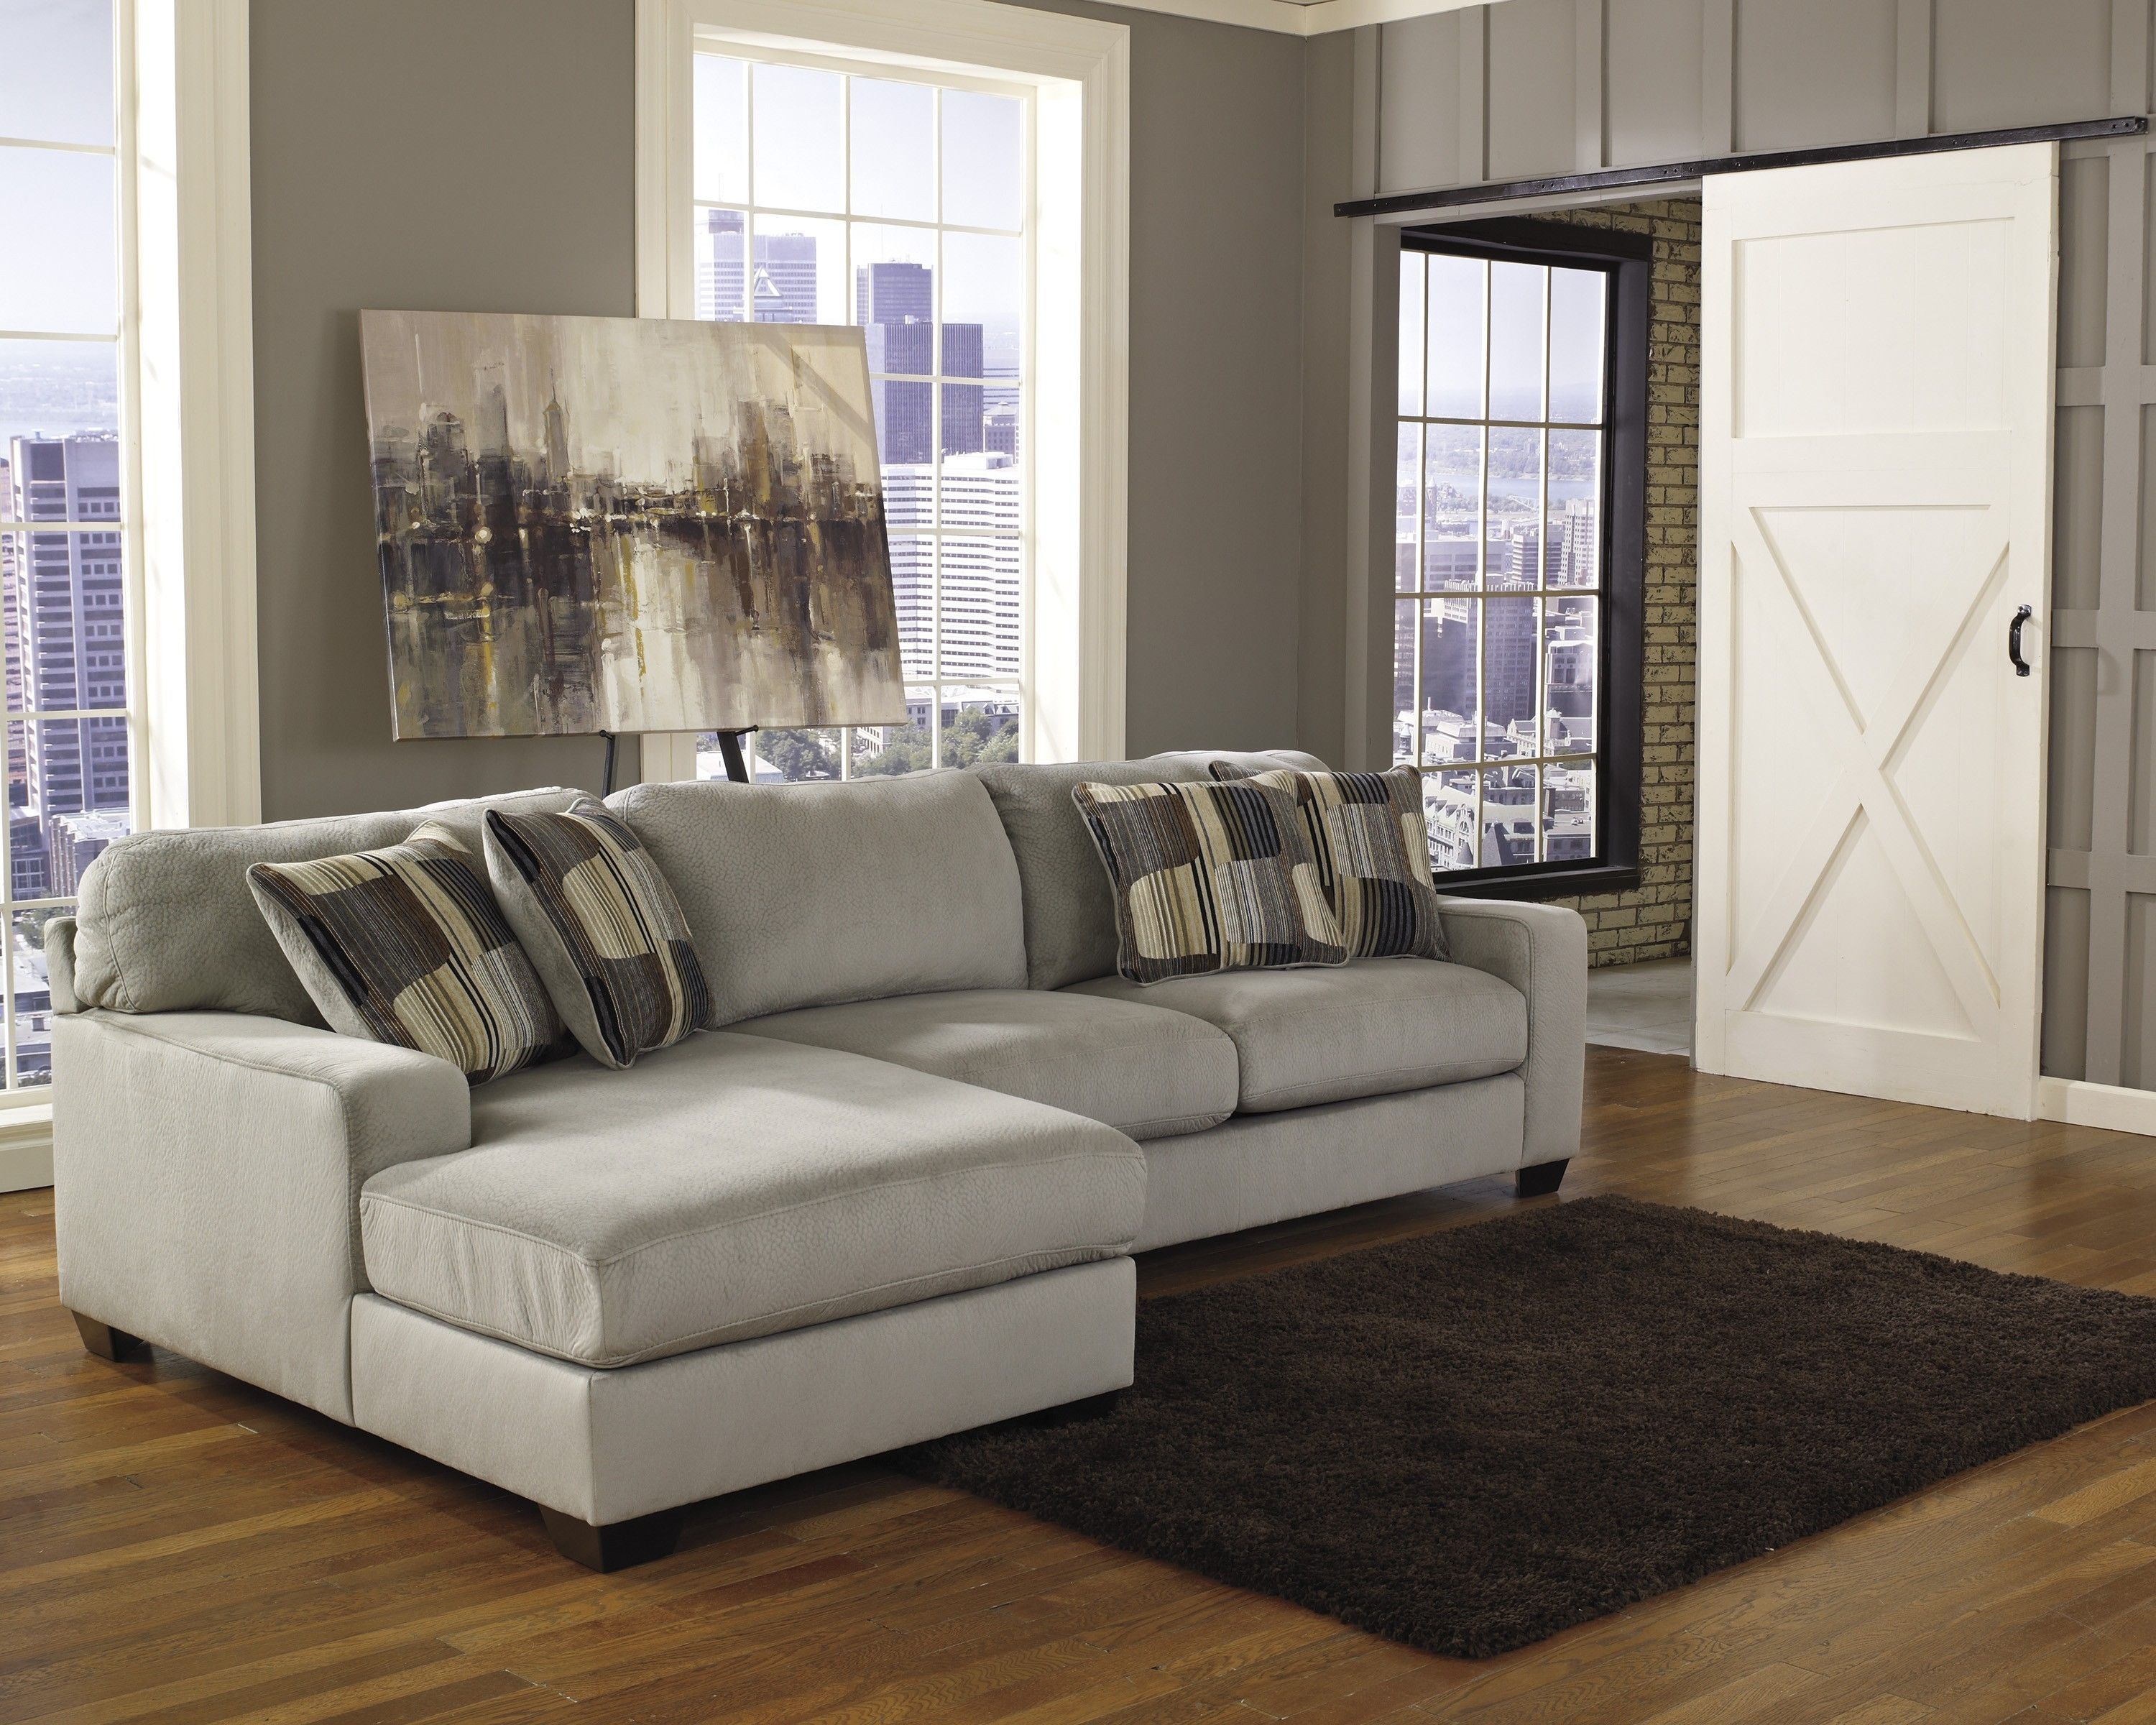 Popular Grey Velvet Sectional Sofa 87 With Additional Classic Intended For Classic Sectional Sofas (Photo 12 of 12)